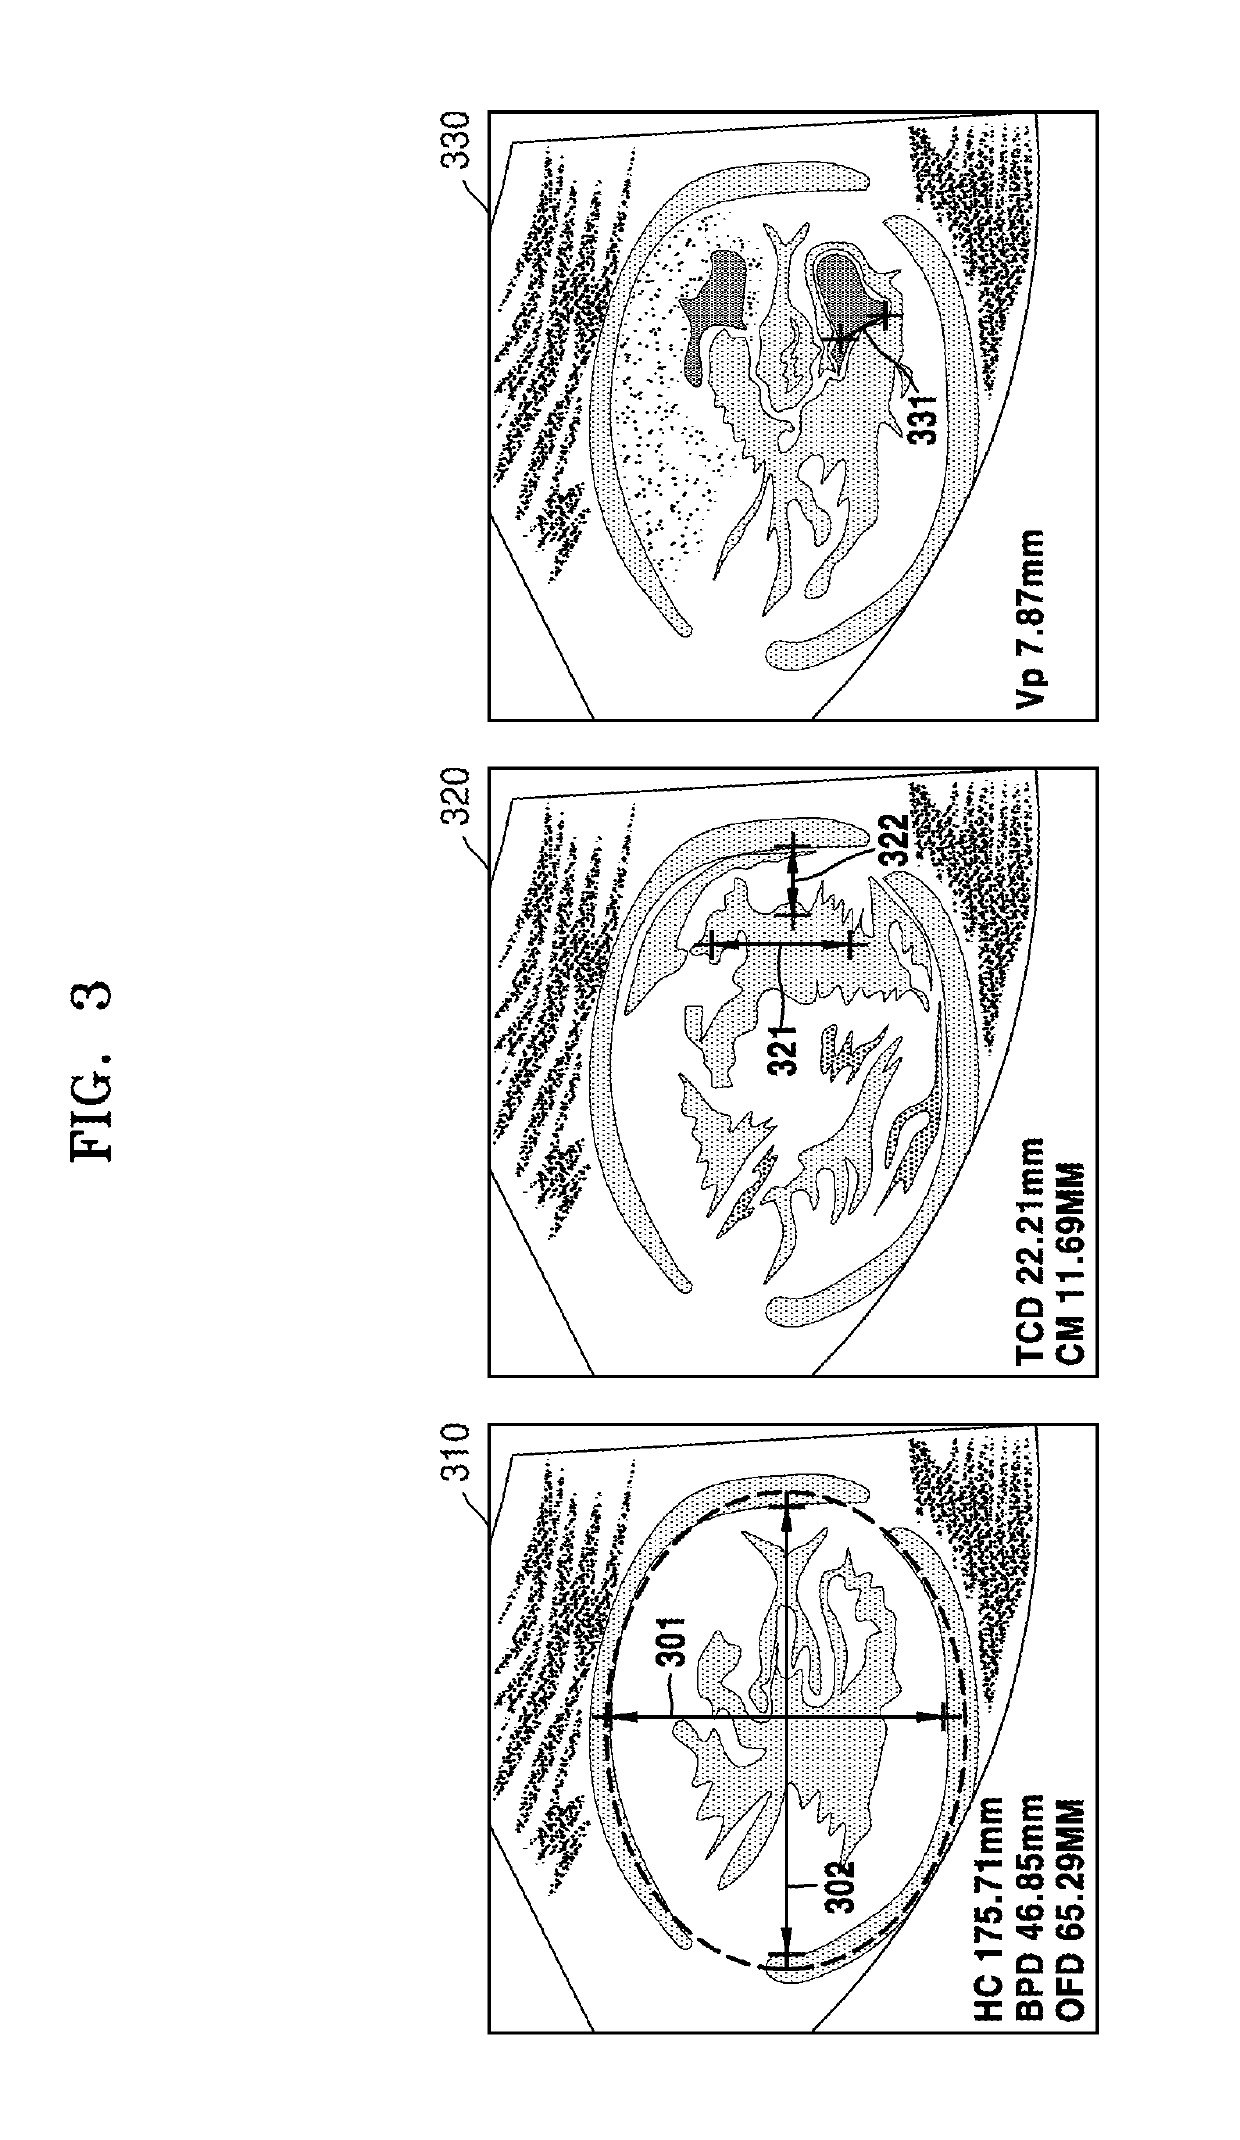 Ultrasound diagnosis apparatus and method for generating image from volume data and displaying the same